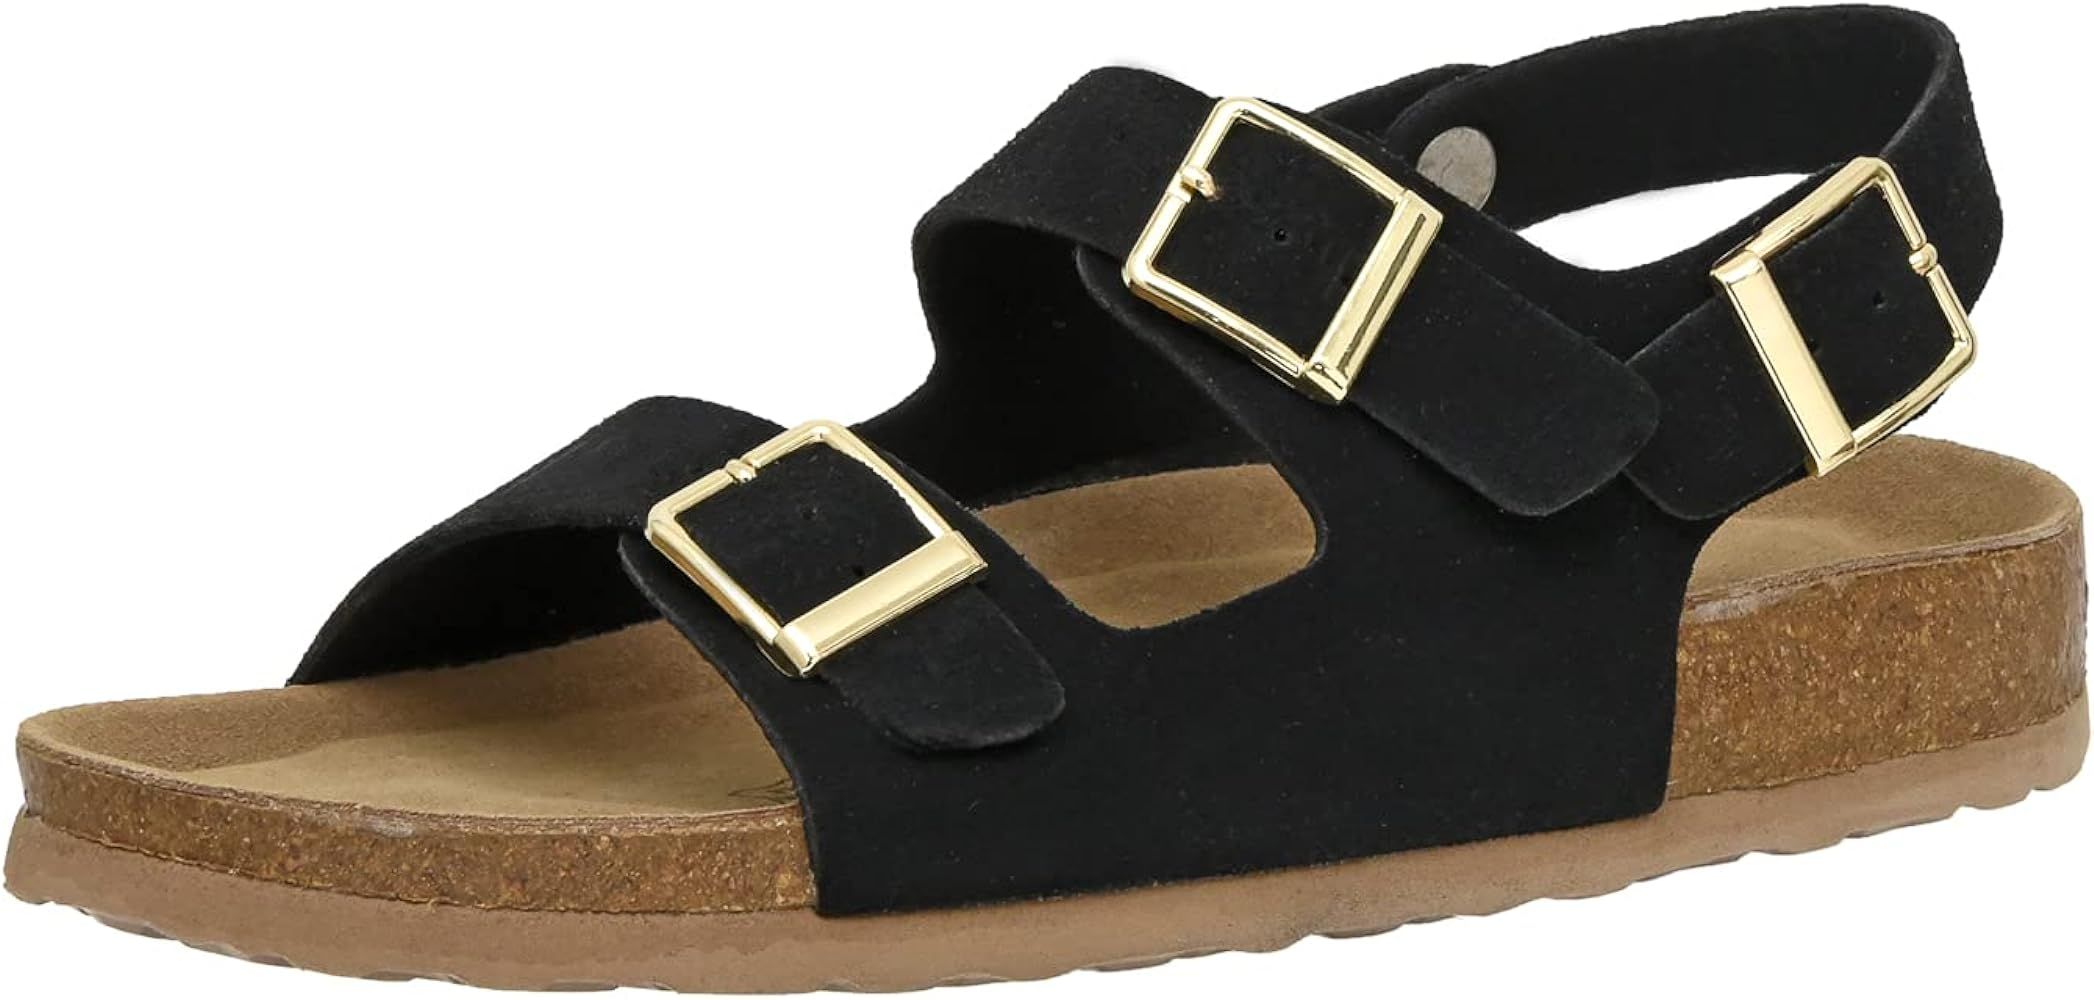 CUSHIONAIRE Women's Lulu Cork footbed Sandal with +Comfort and Wide Widths Available | Amazon (US)